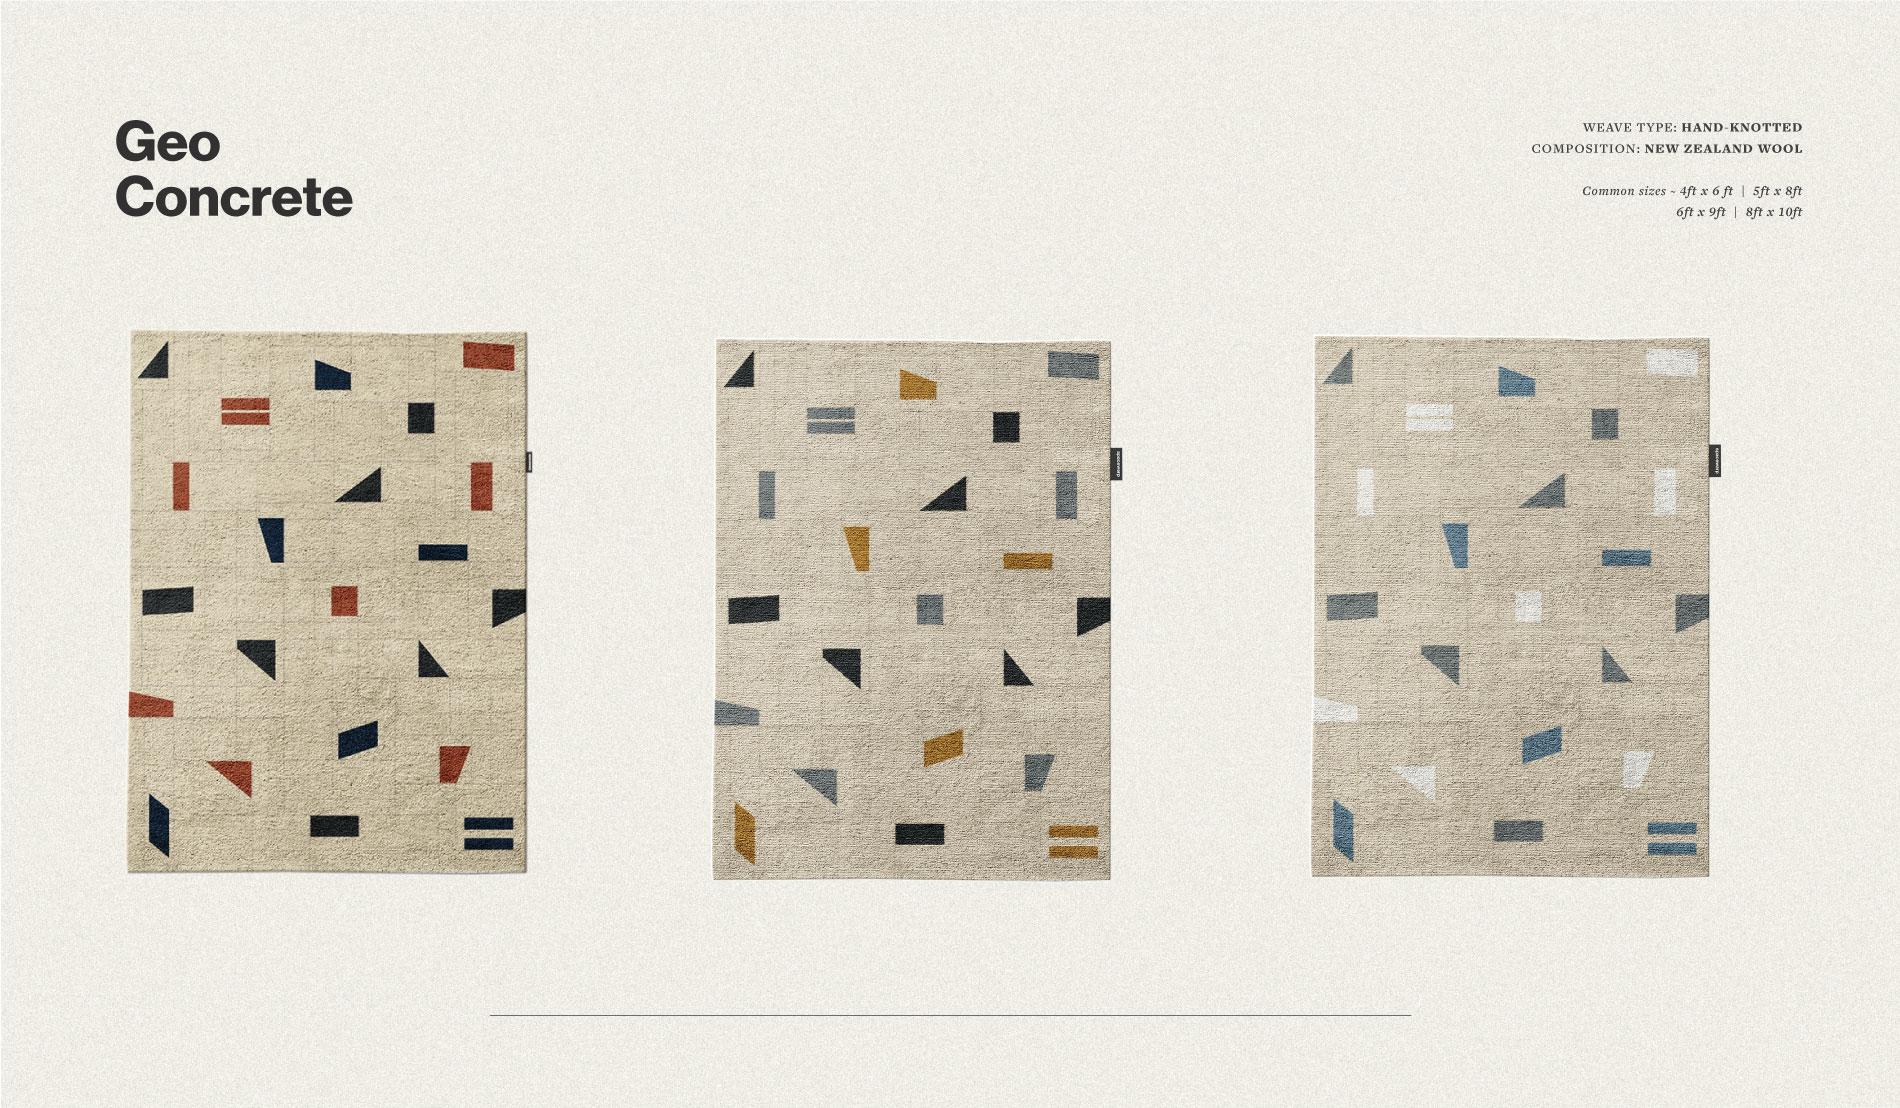 Geometric blocks of colour, on a delicate grid, seated on charred beige. Chaos, choreographed.Geo Concrete rug is Hand Knotted with New Zealand wool, perfect for s minimal and modern living room bedroom or an office space.

Geo Concrete Rug is